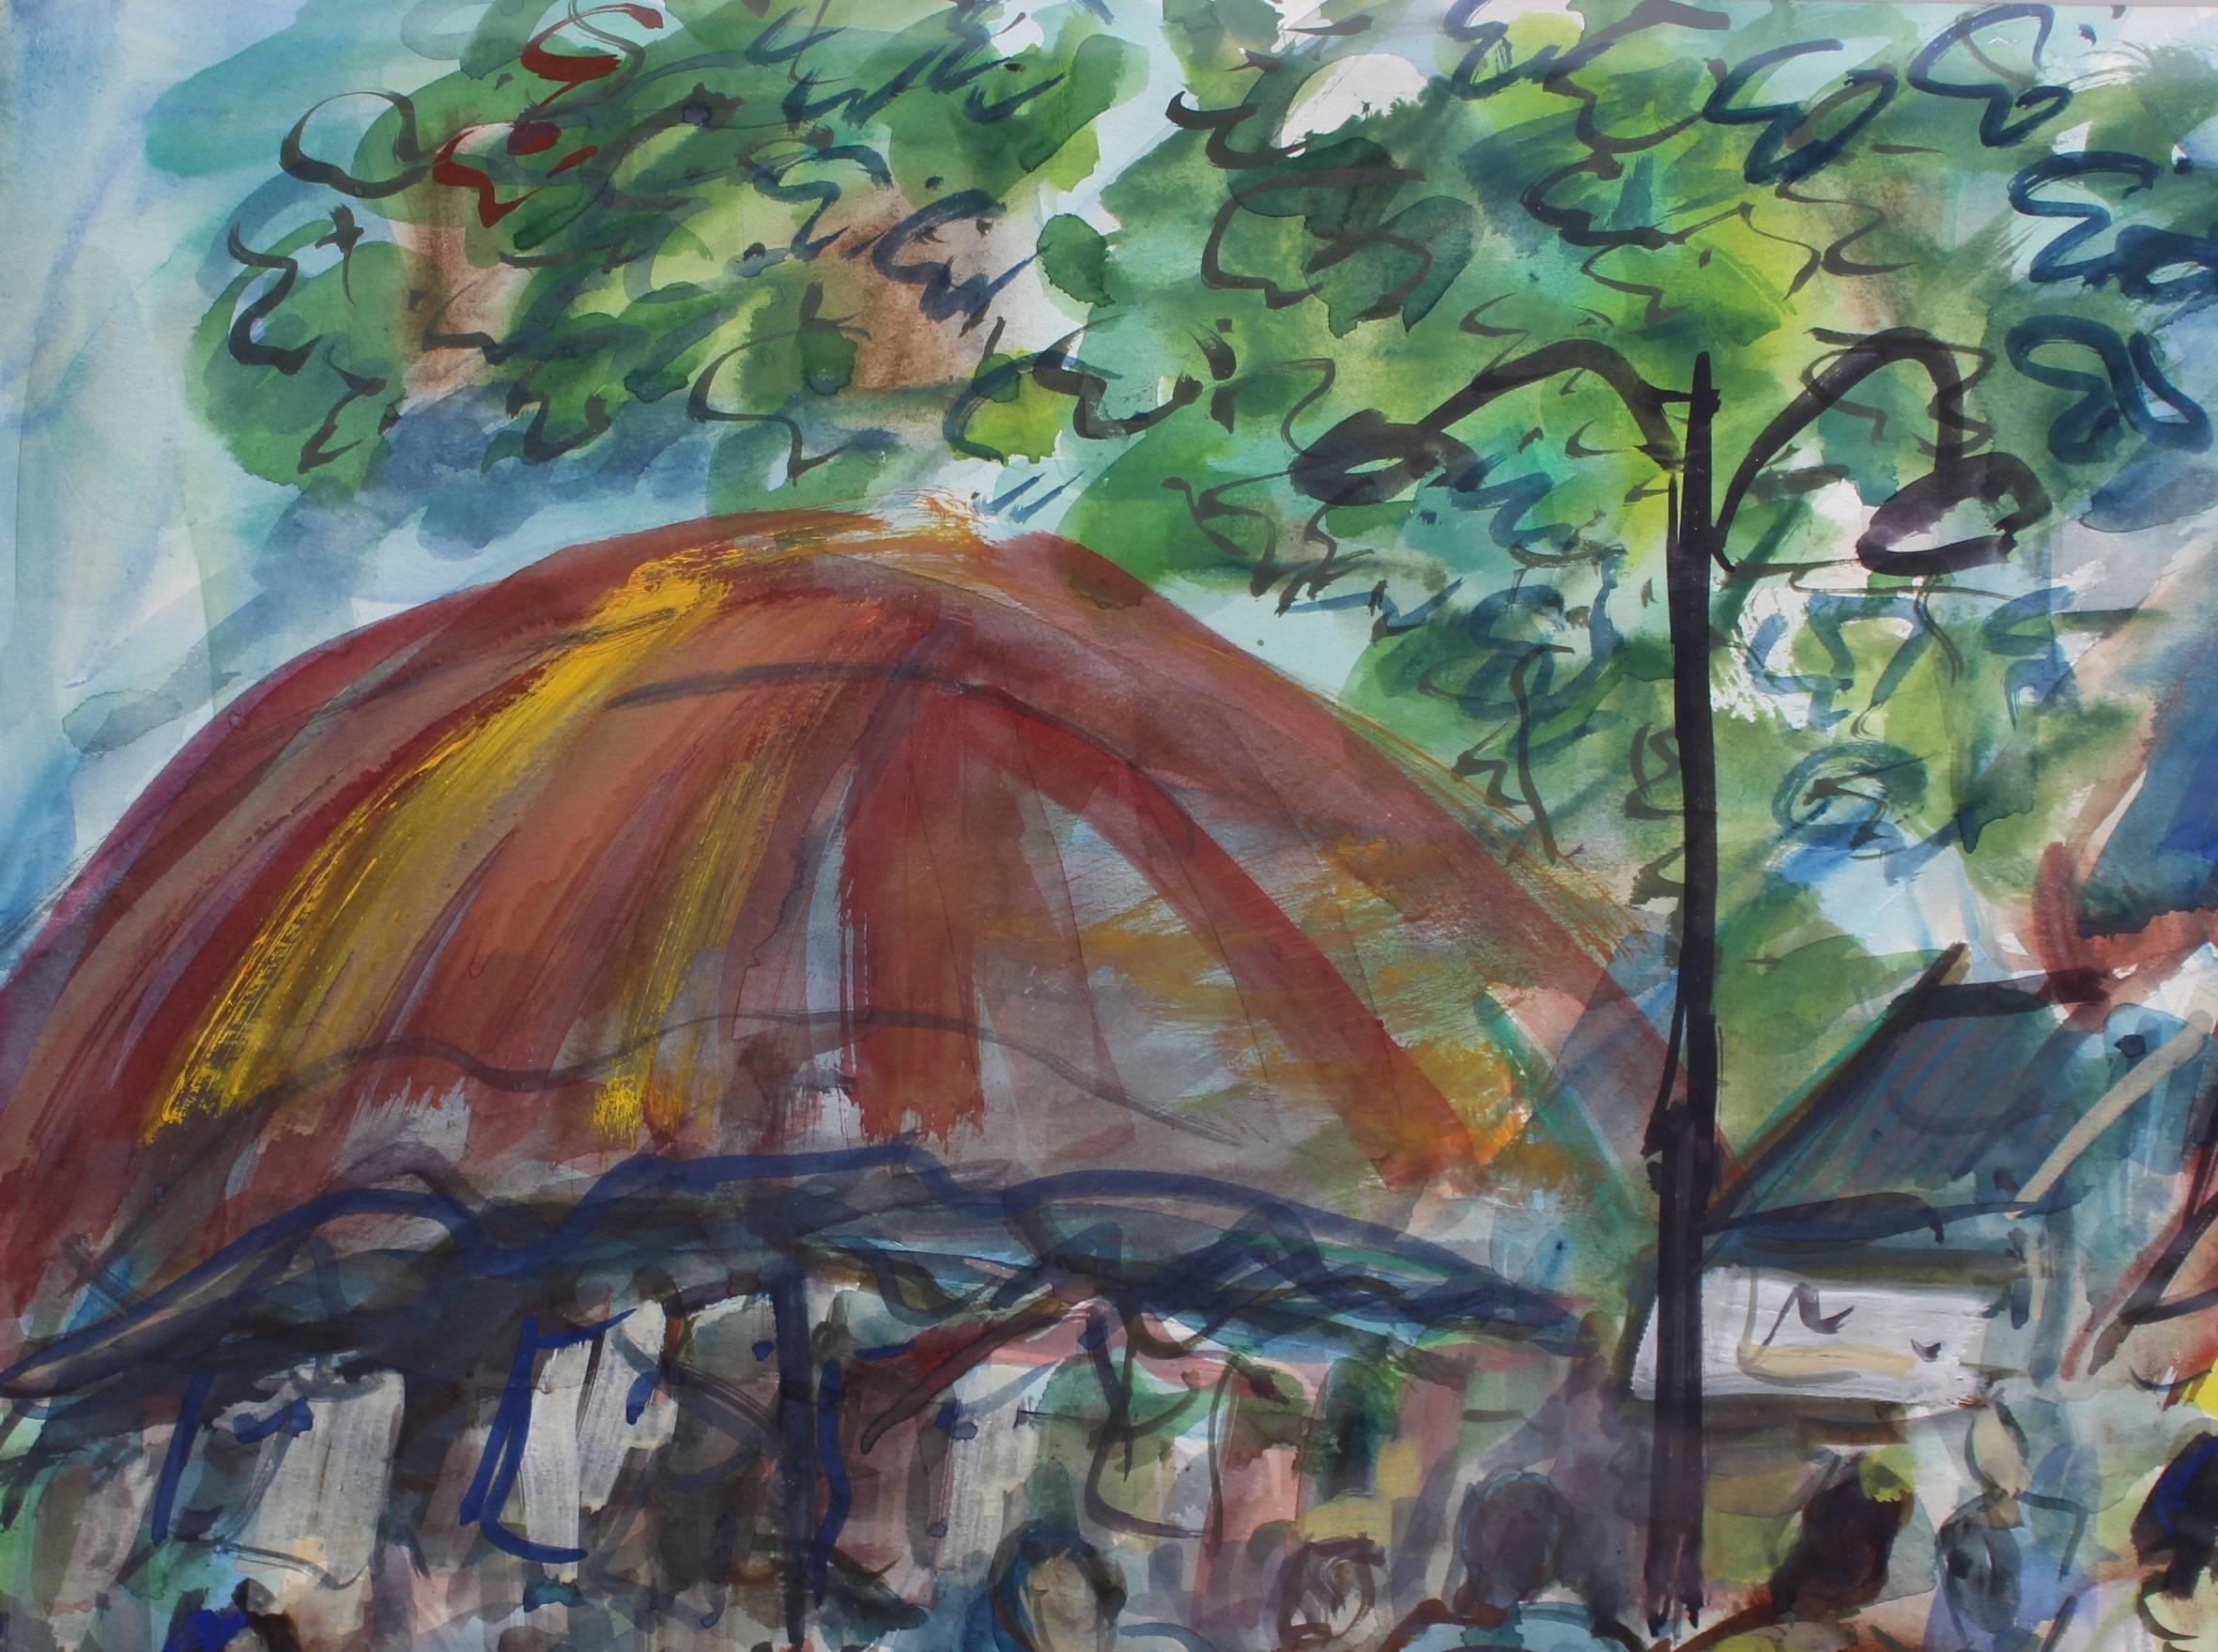 'Parisian Street Market', watercolour on paper (circa 1970s) by Roland DuBuc (1924 - 1998). A scene from a vibrant and colourful market on a summer's day in Paris, beautifully captured by the artist. Known for his Parisian scenes, DuBuc focuses on a